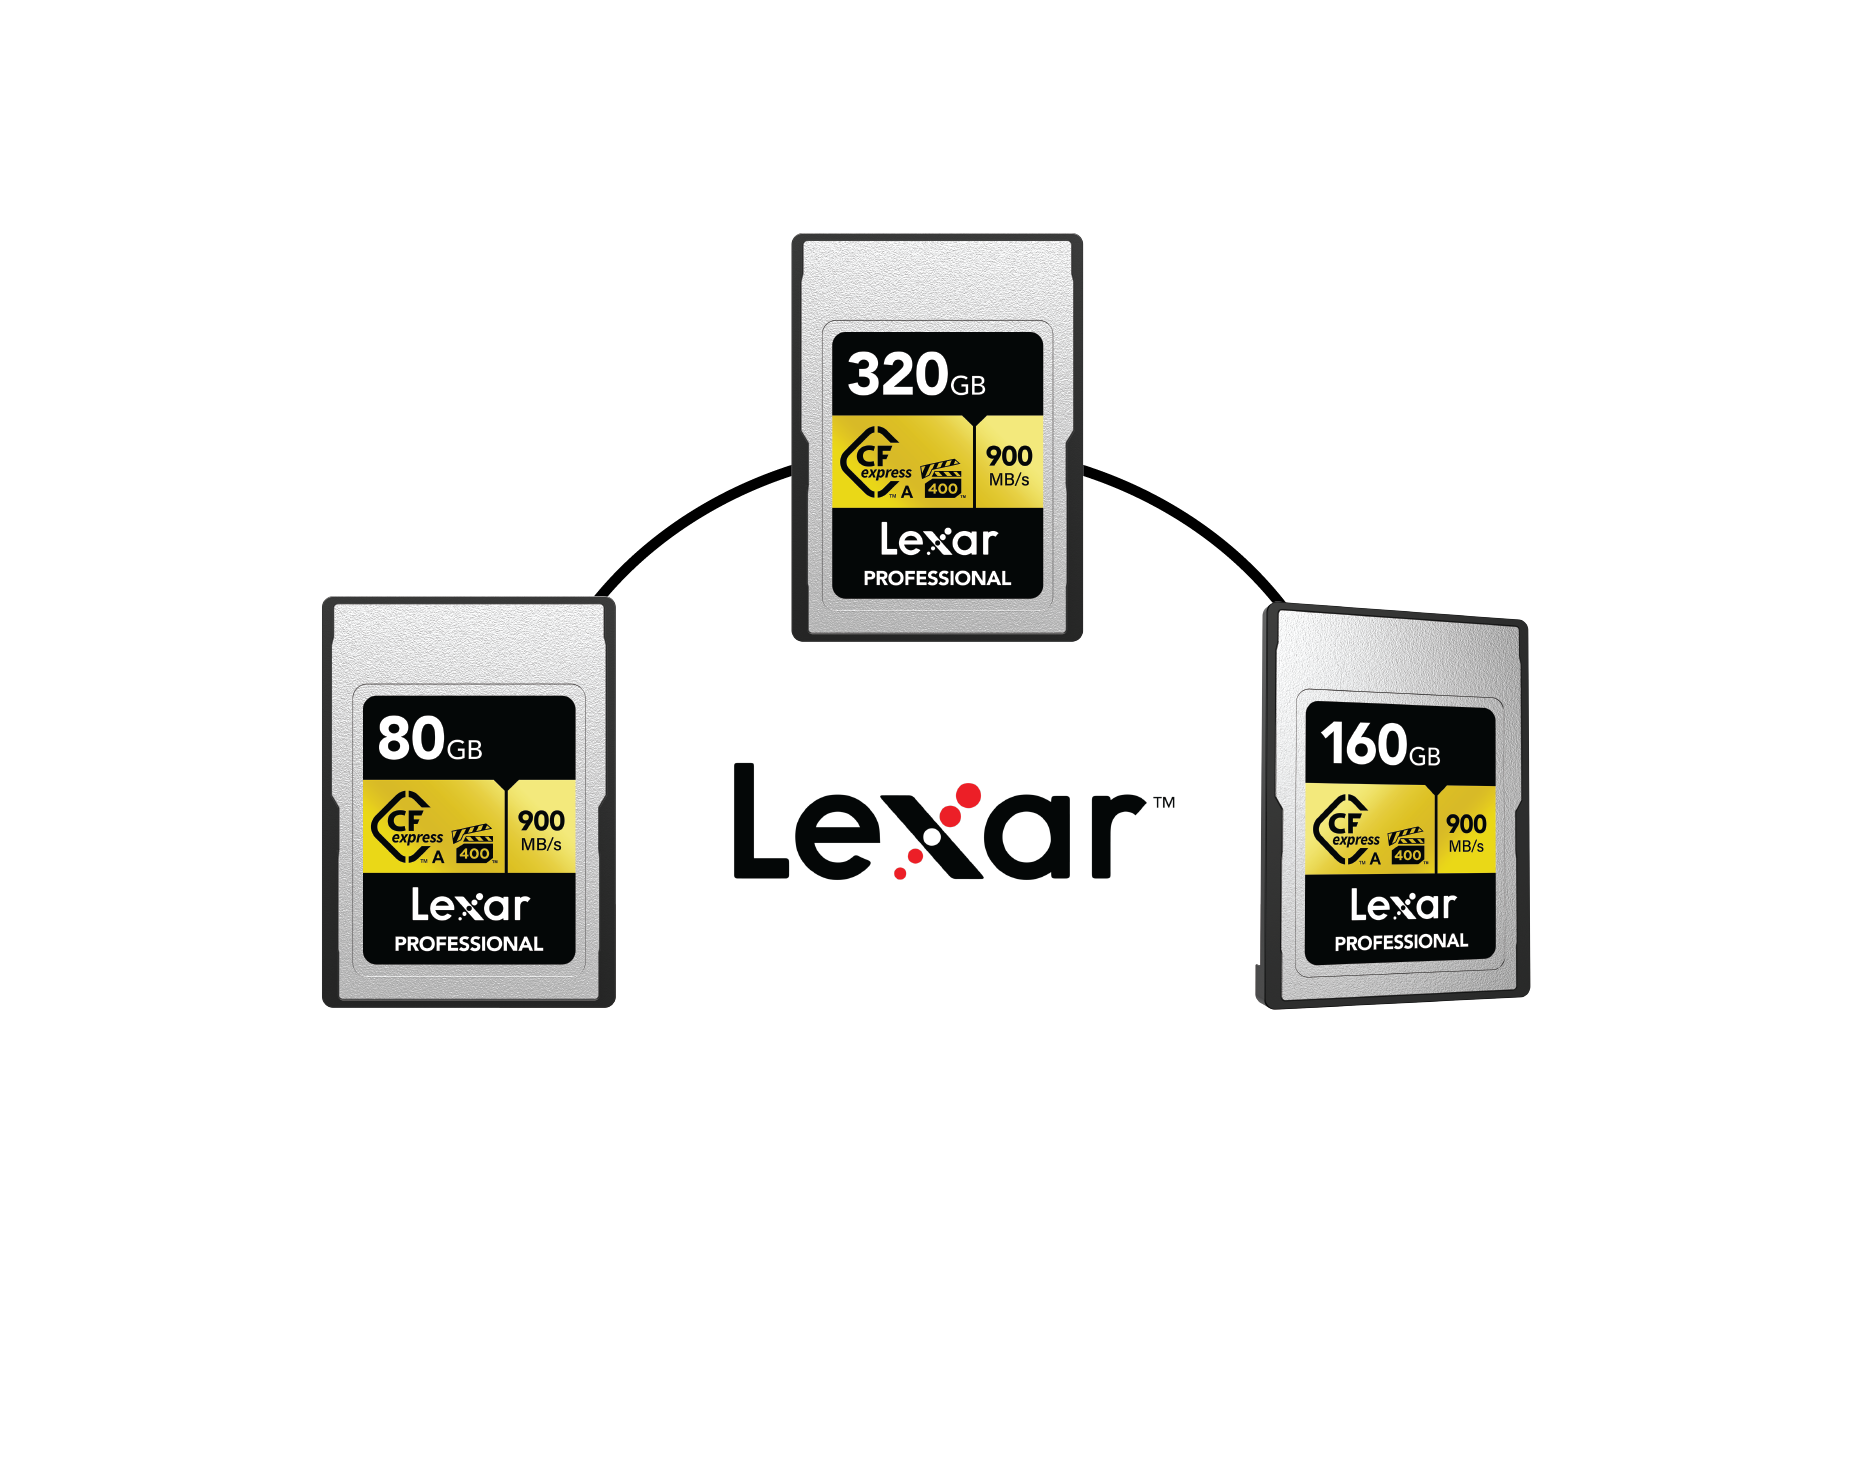 Lexar launches the World’s Fastest CFexpress™ Type A card GOLD series in India